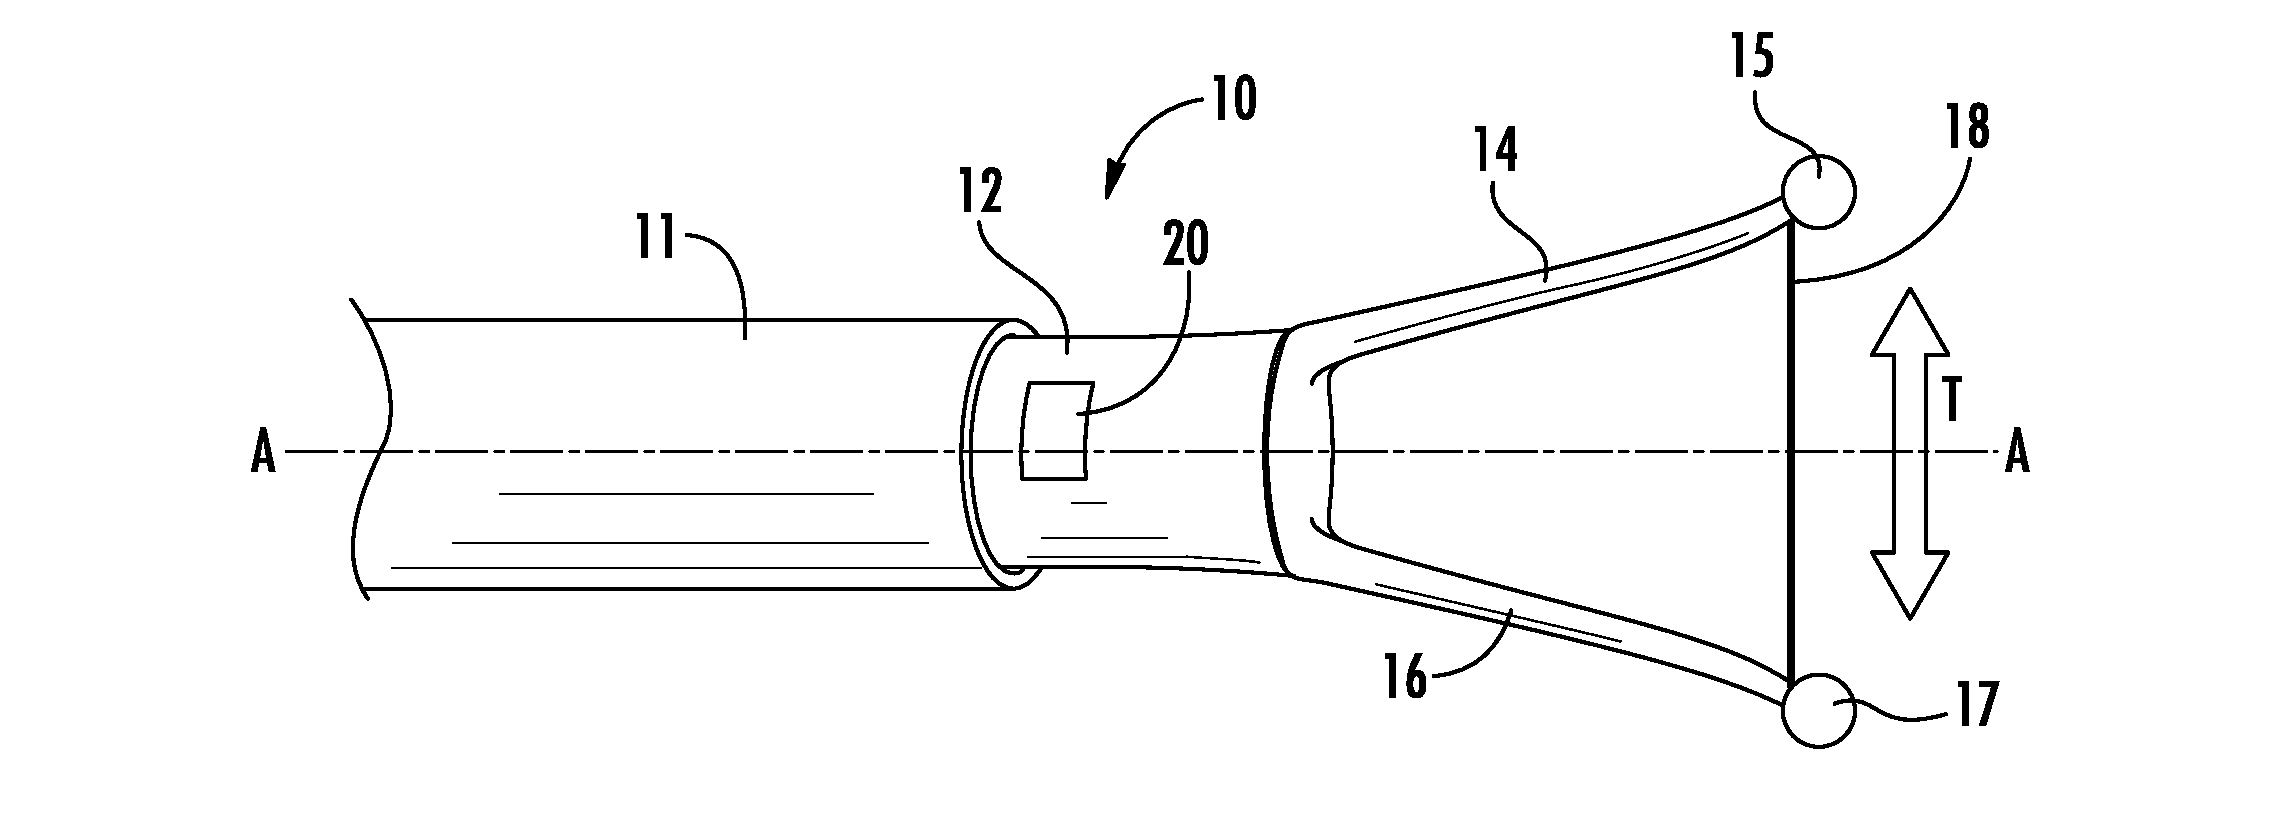 Vibrating surgical instruments for blunt dissection and methods for use thereof